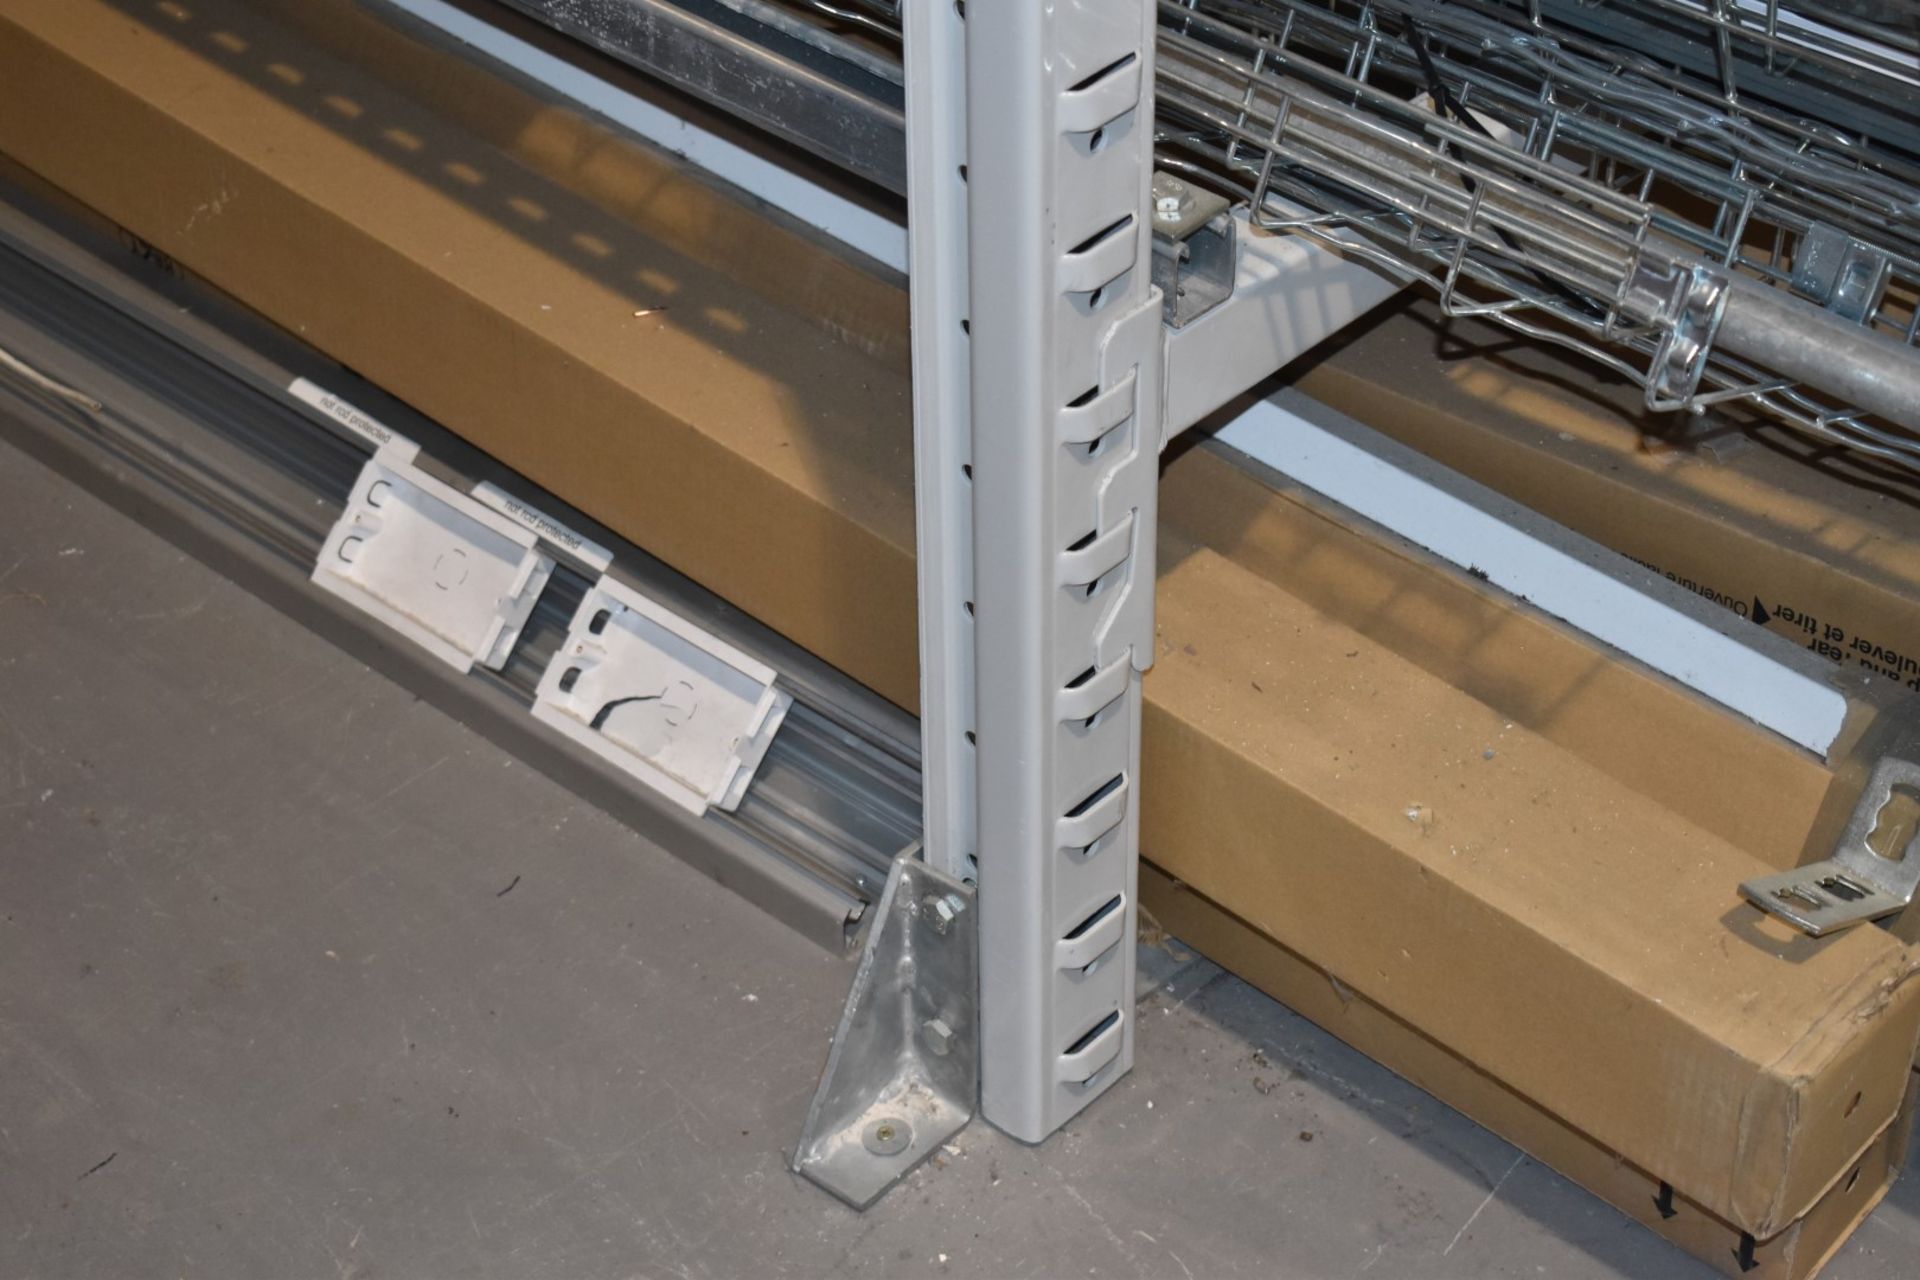 1 x Storage Rack Suitable For Long Beams, Plastics, Wood, Poles or Trunking etc - Image 6 of 6